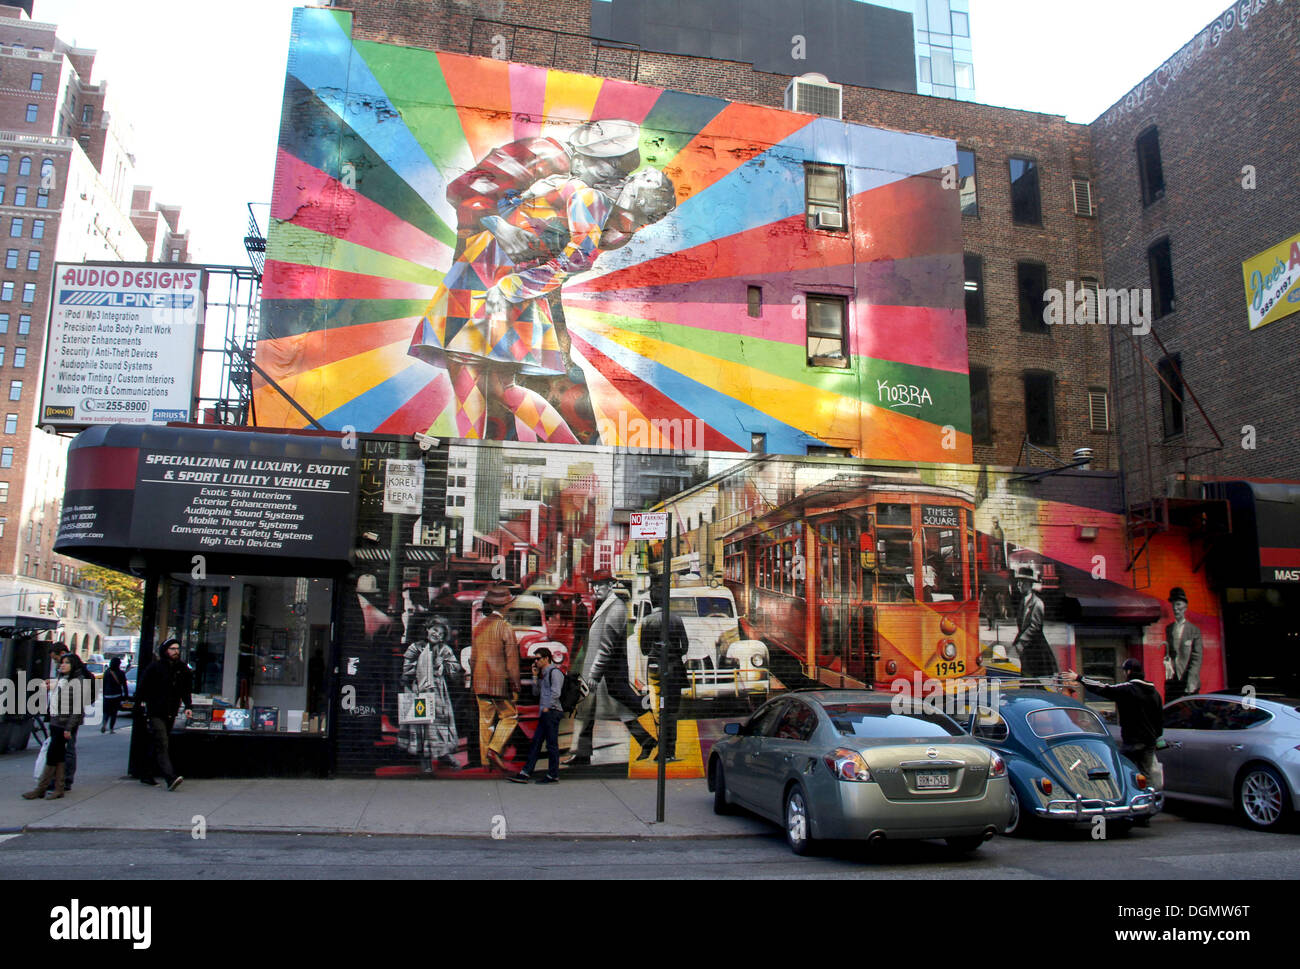 New York, New York, USA. 21st Oct, 2013. A view of the mural 'Love is in the Air' by Brazilian artist Eduardo Kobra located on West 25th Street and 10th Avenue in West Chelsea. The mural reworks the famous Eisenstaedt's 1945 'VJ in Times Square' photo. Kobra is known for his massive murals around the world infusing vibrant colors and iconic nostalgic scenes from the early 20th Century. © Nancy Kaszerman/ZUMAPRESS.com/Alamy Live News Stock Photo